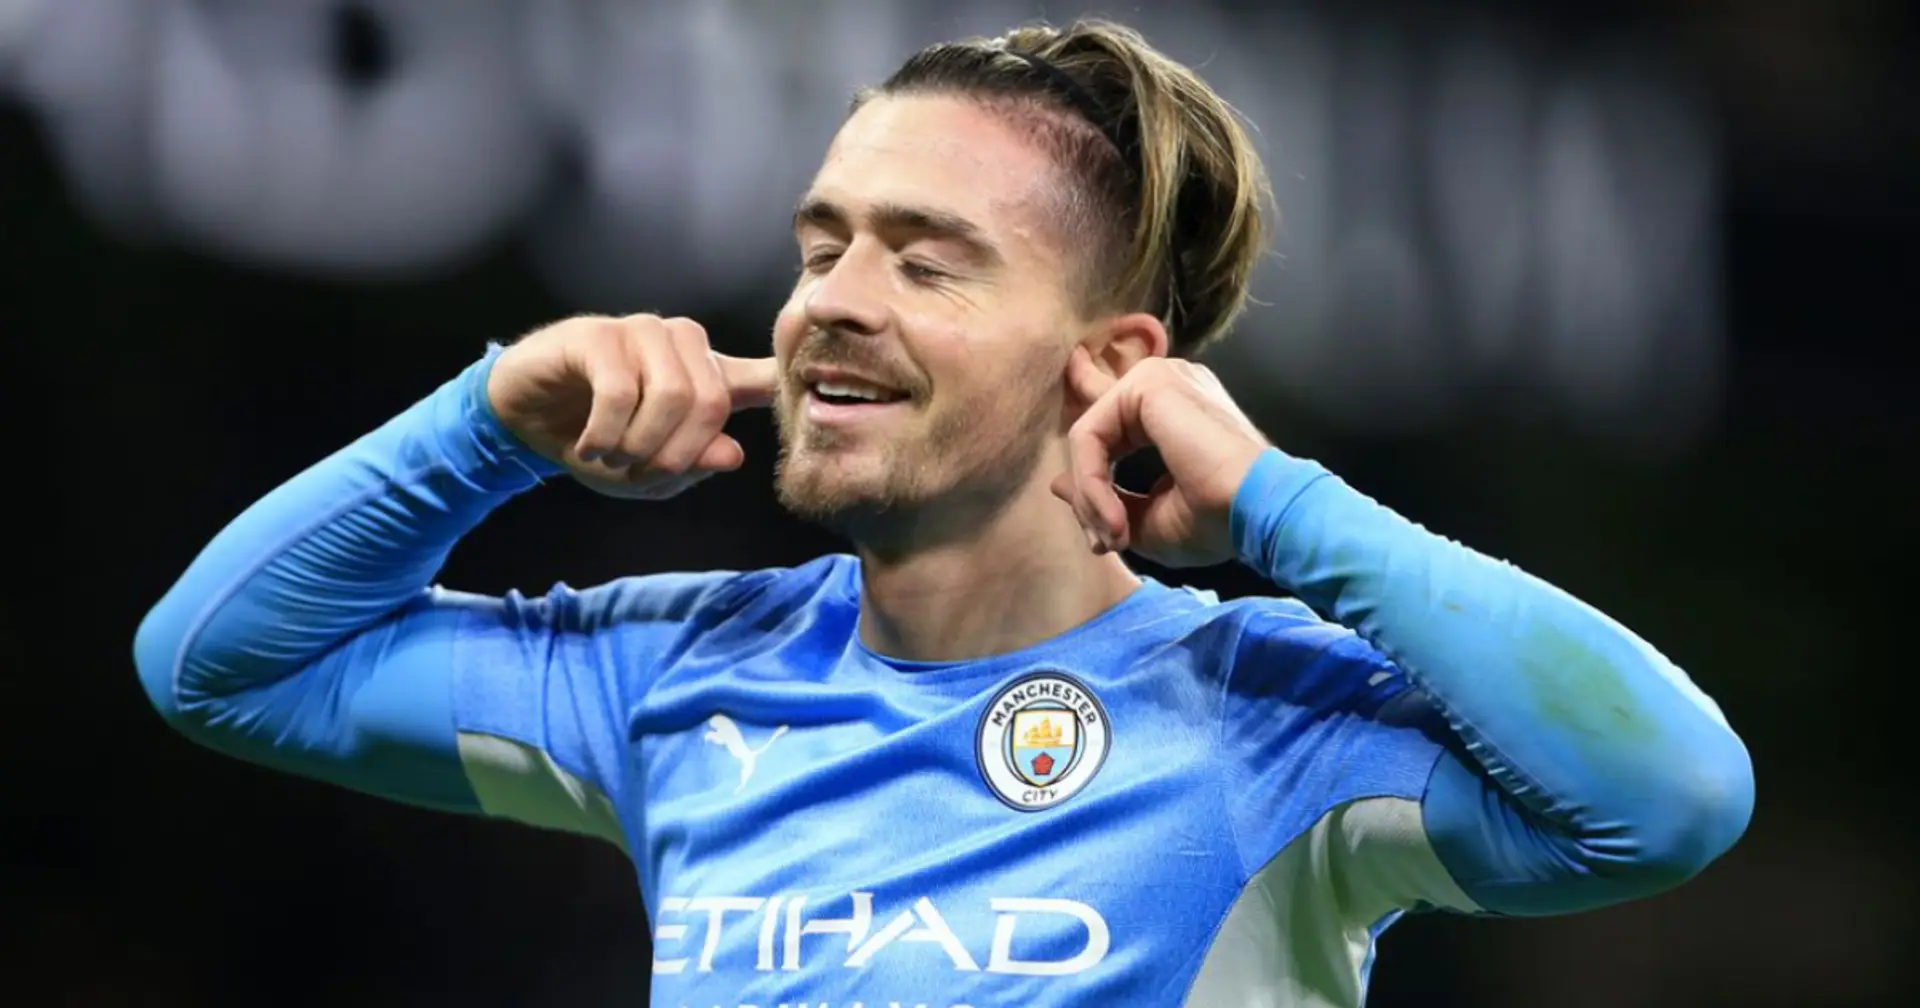 'We have the best manager in the world': Grealish explains why Man City have a chance to win Treble again 